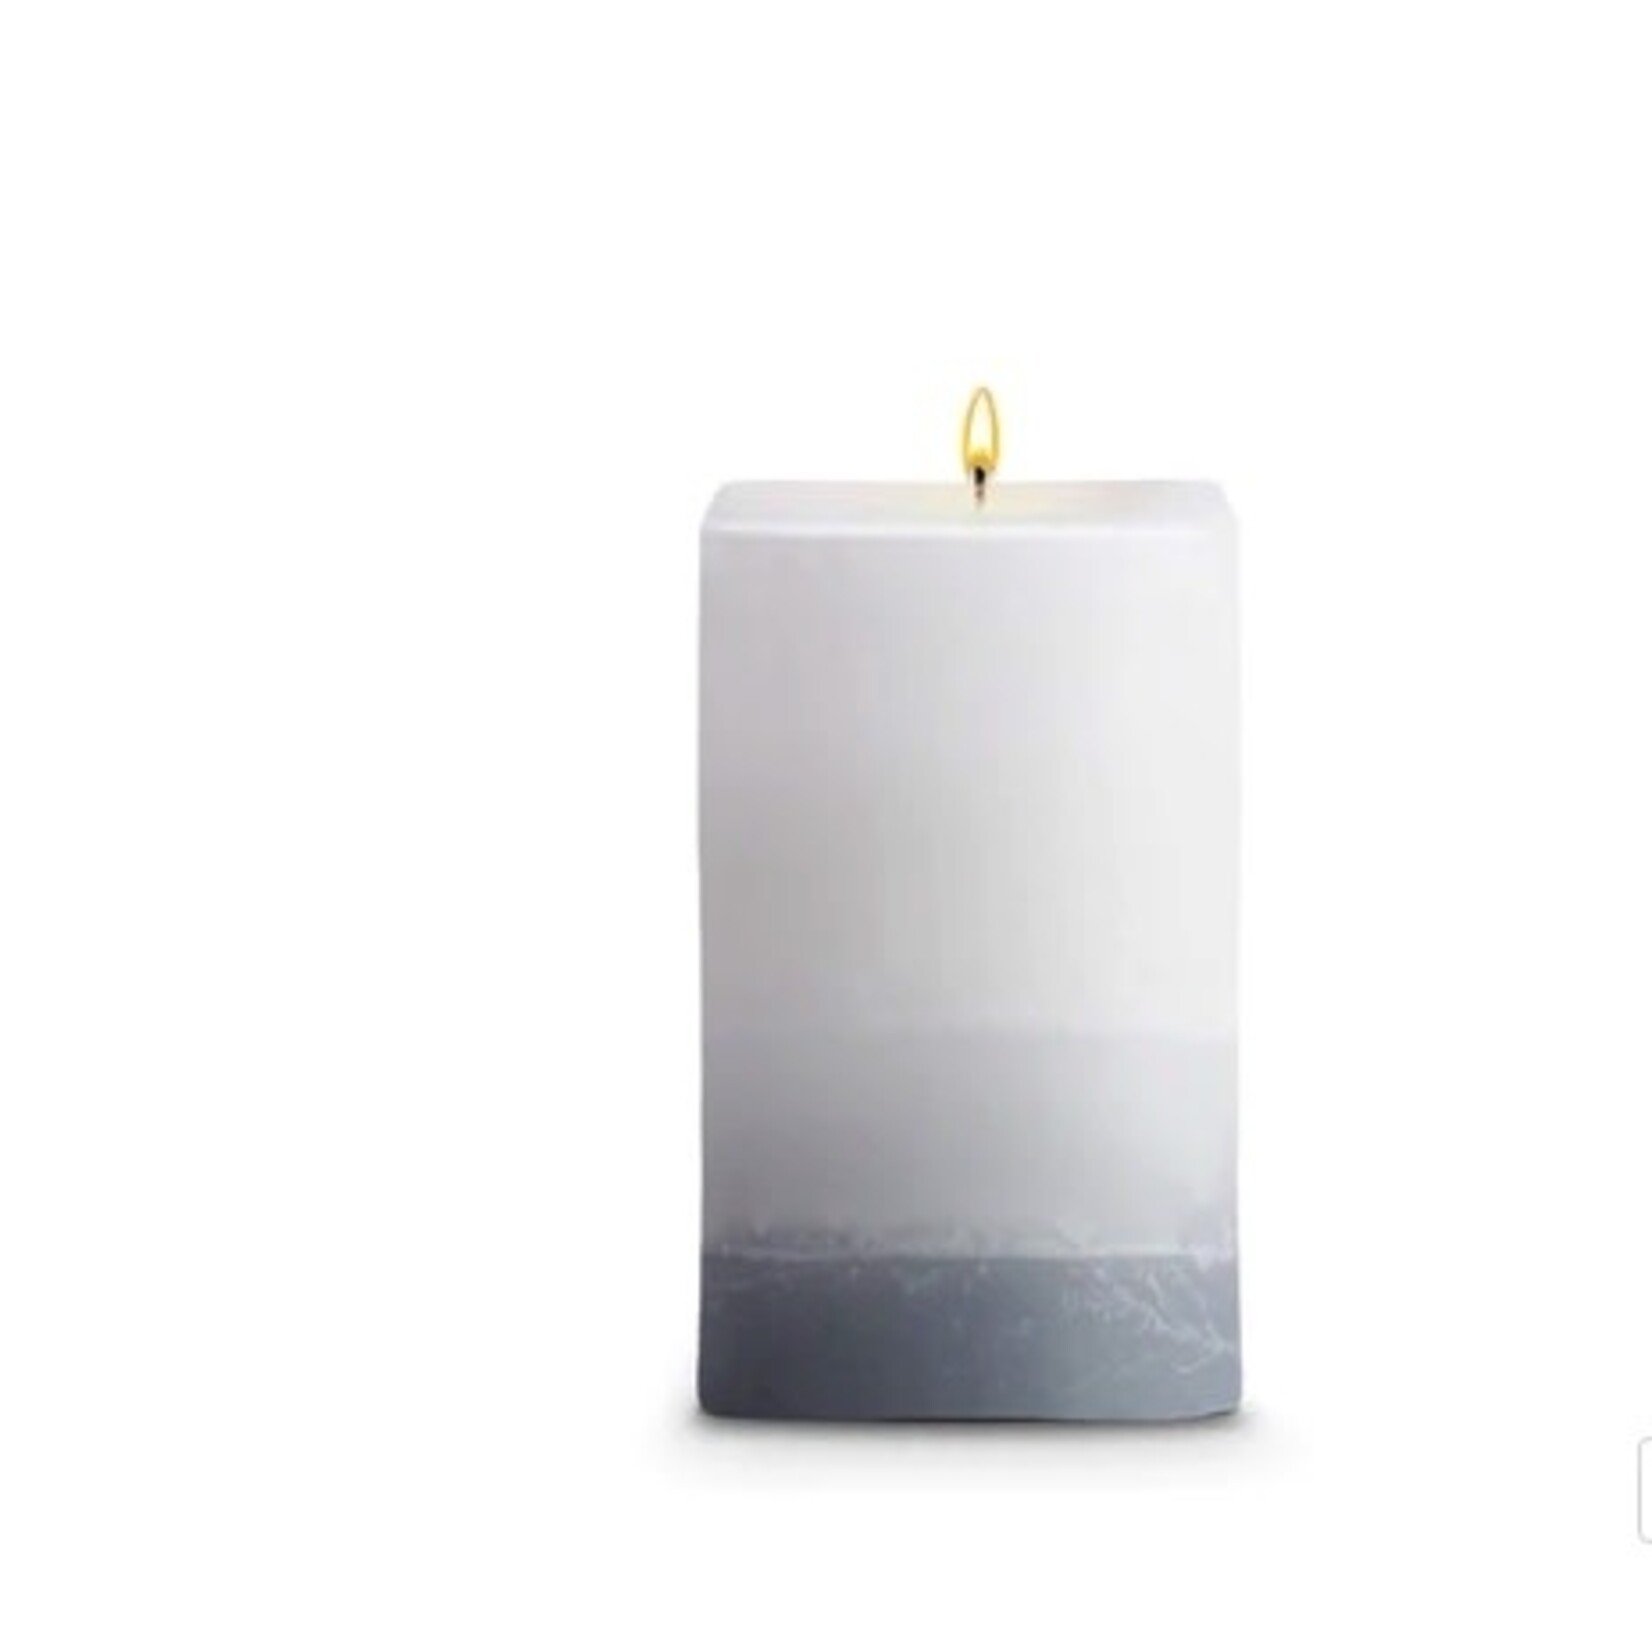 STONE CANDLES STONE PILLAR CANDLE 4.5X9SQ RED CURRANT